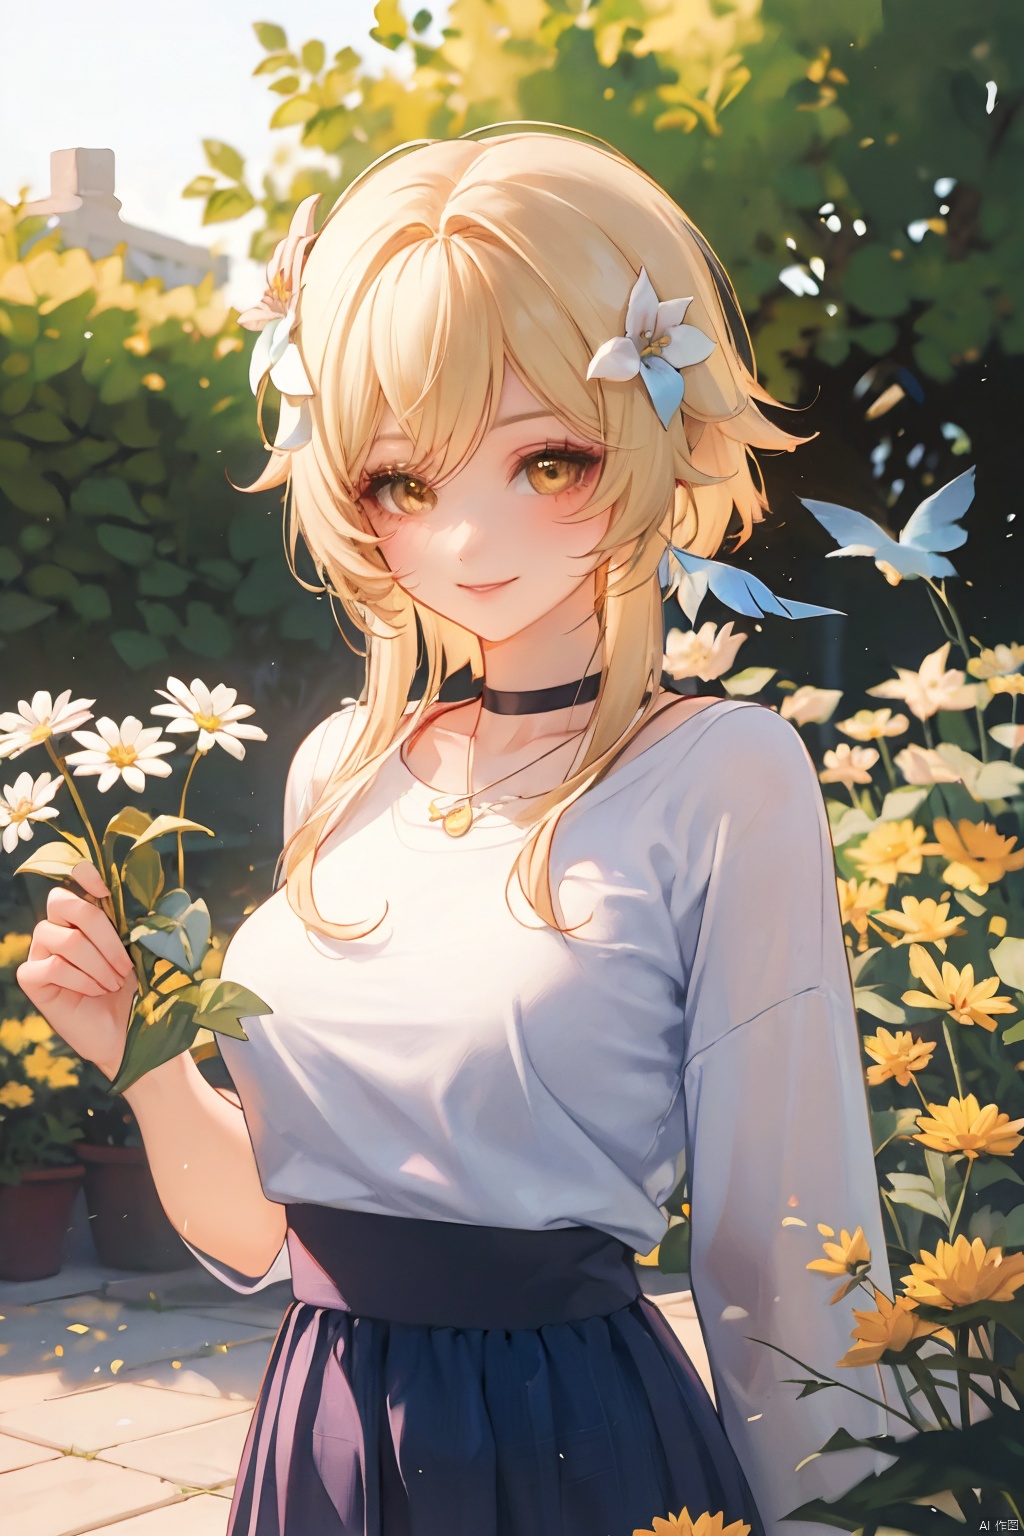 (best quanlity）a 18 years old girl, yellow hair with white flower, gardening, happily smile, out door